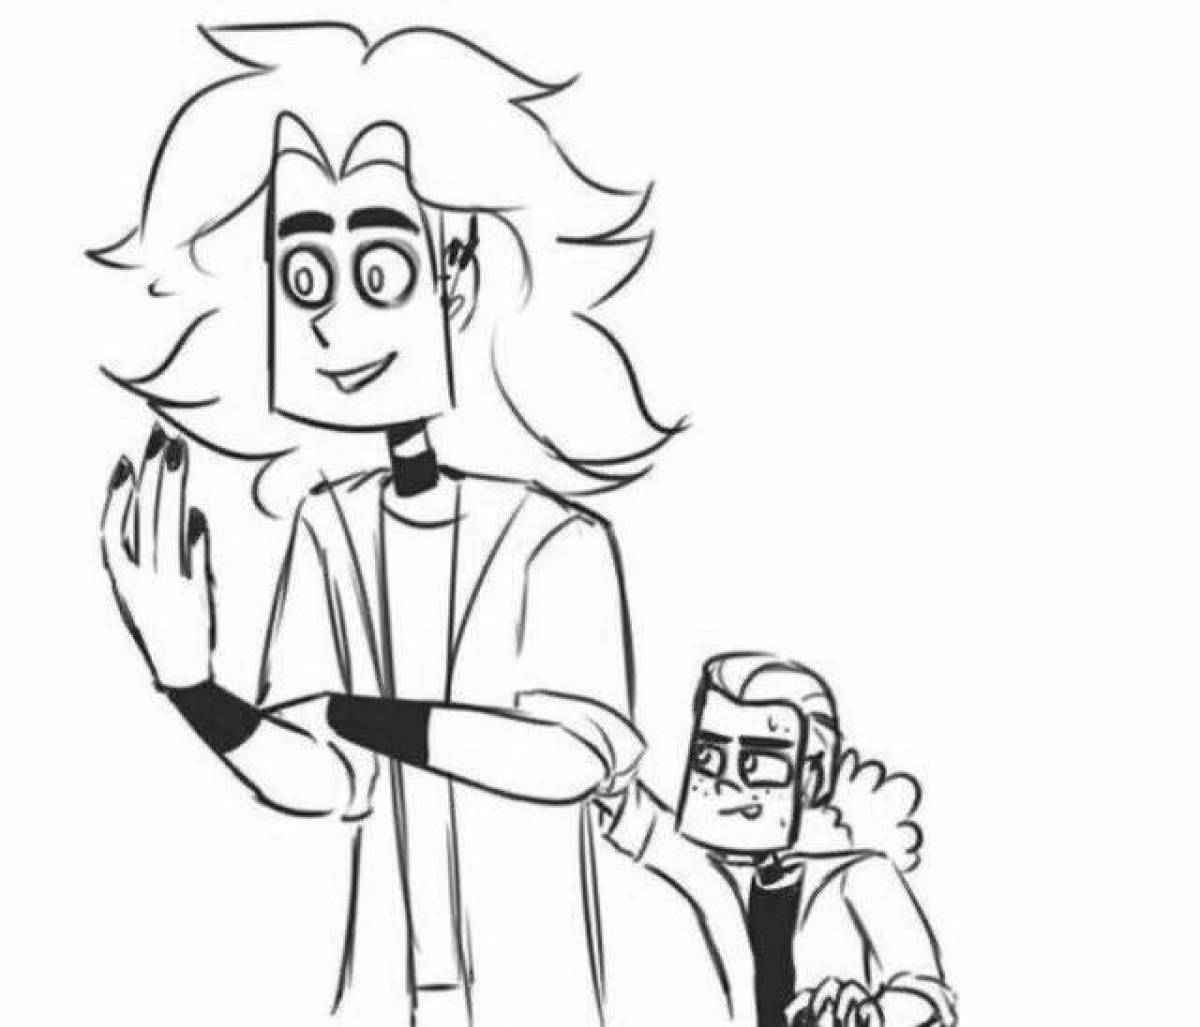 Metal family animated coloring page